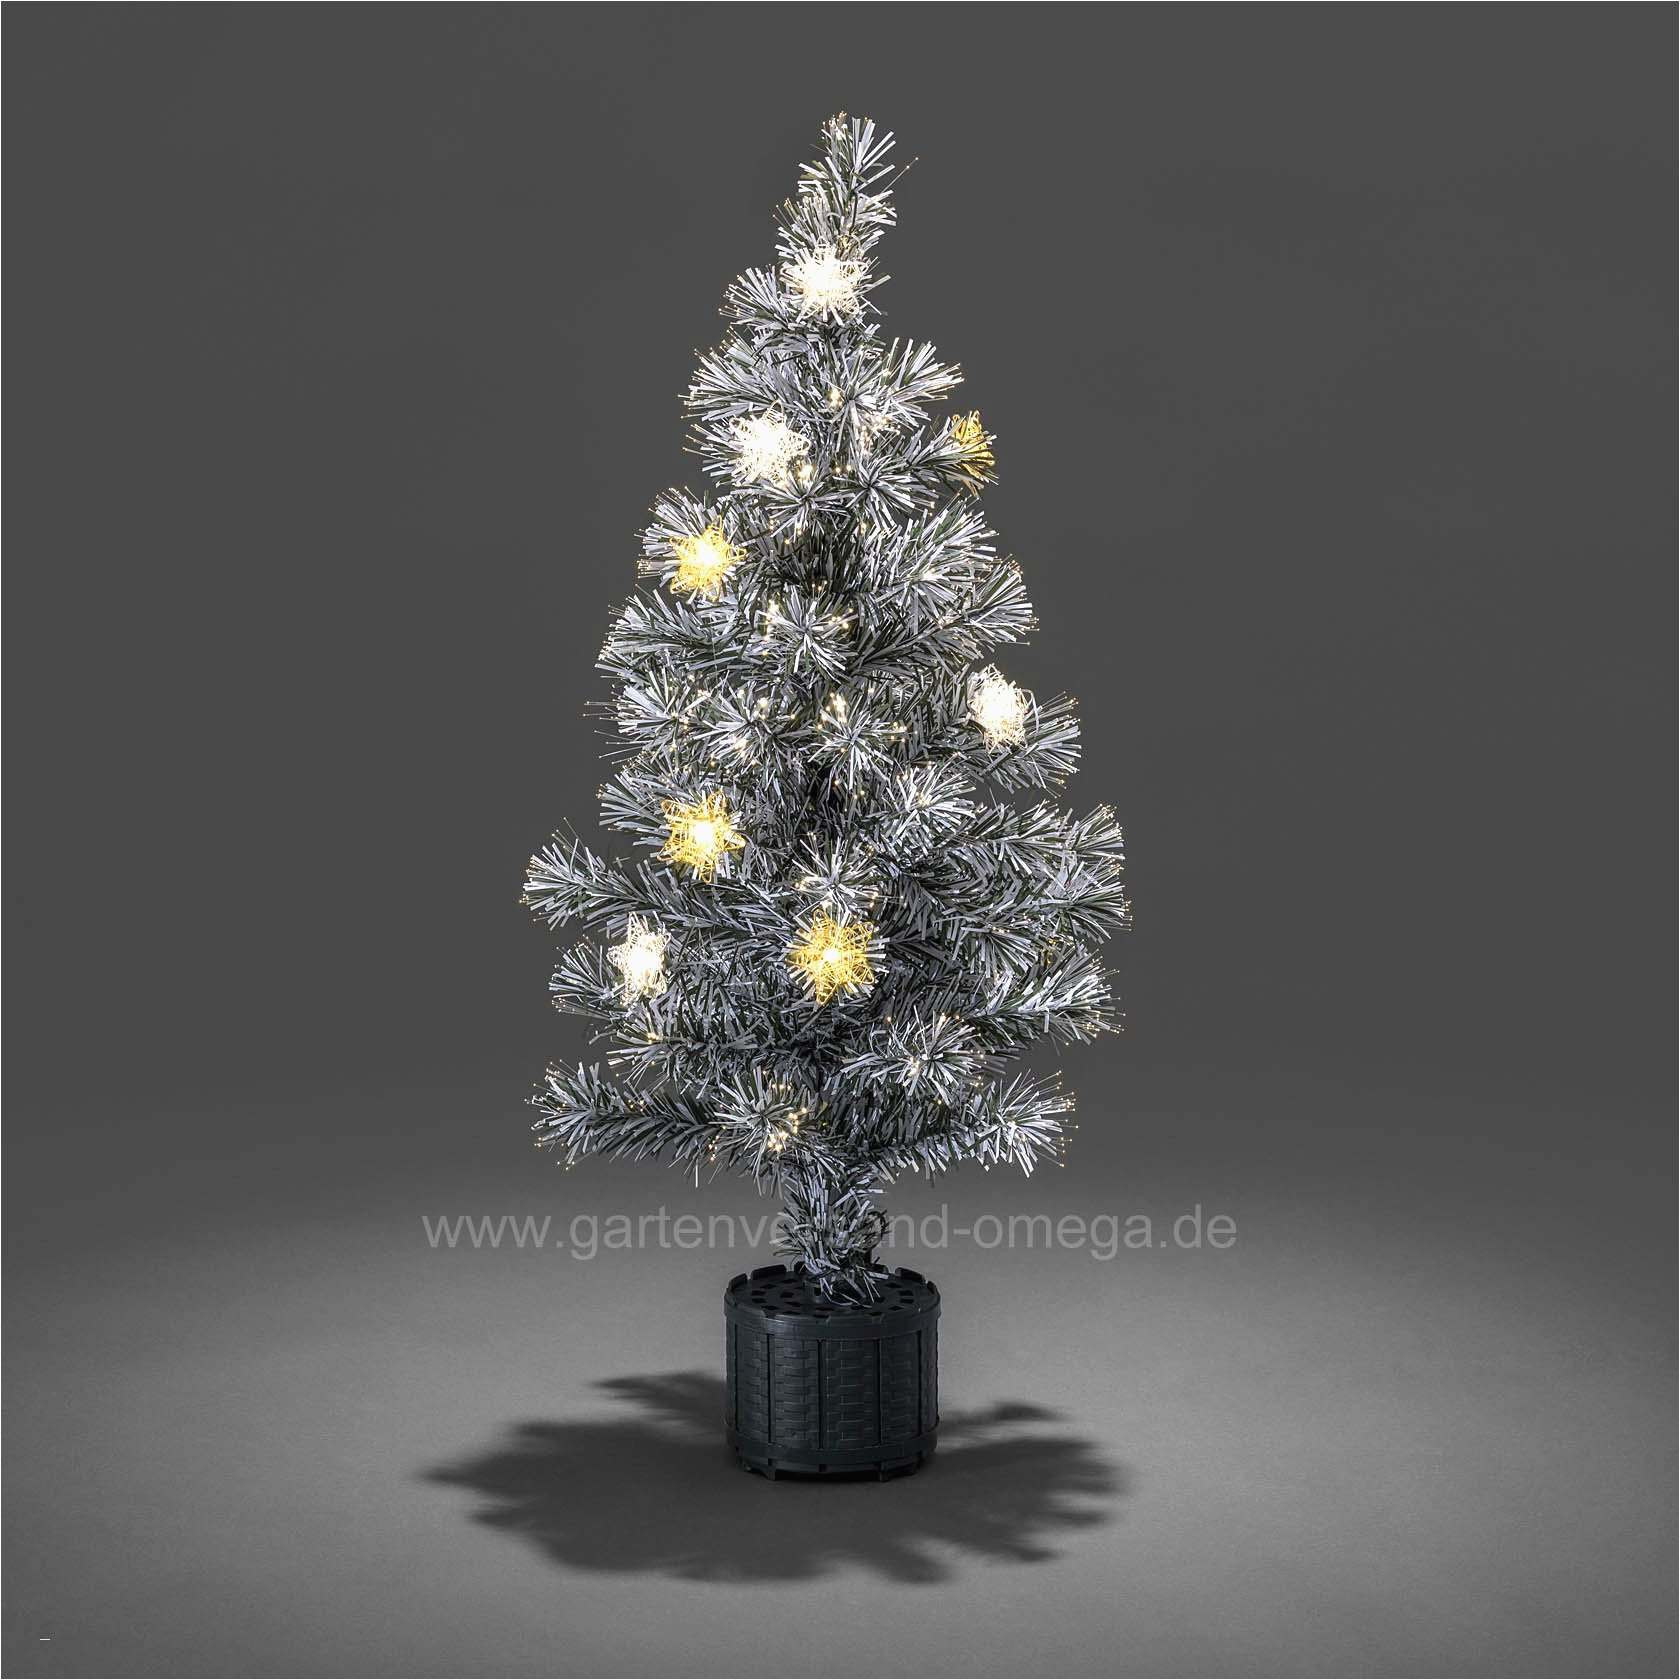 19 Lovable Natural Branches for Vases 2024 free download natural branches for vases of purple led christmas lights elegant dried flowers tree led light for purple led christmas lights for your house outdoor led lights for trees lovely outdoor chri